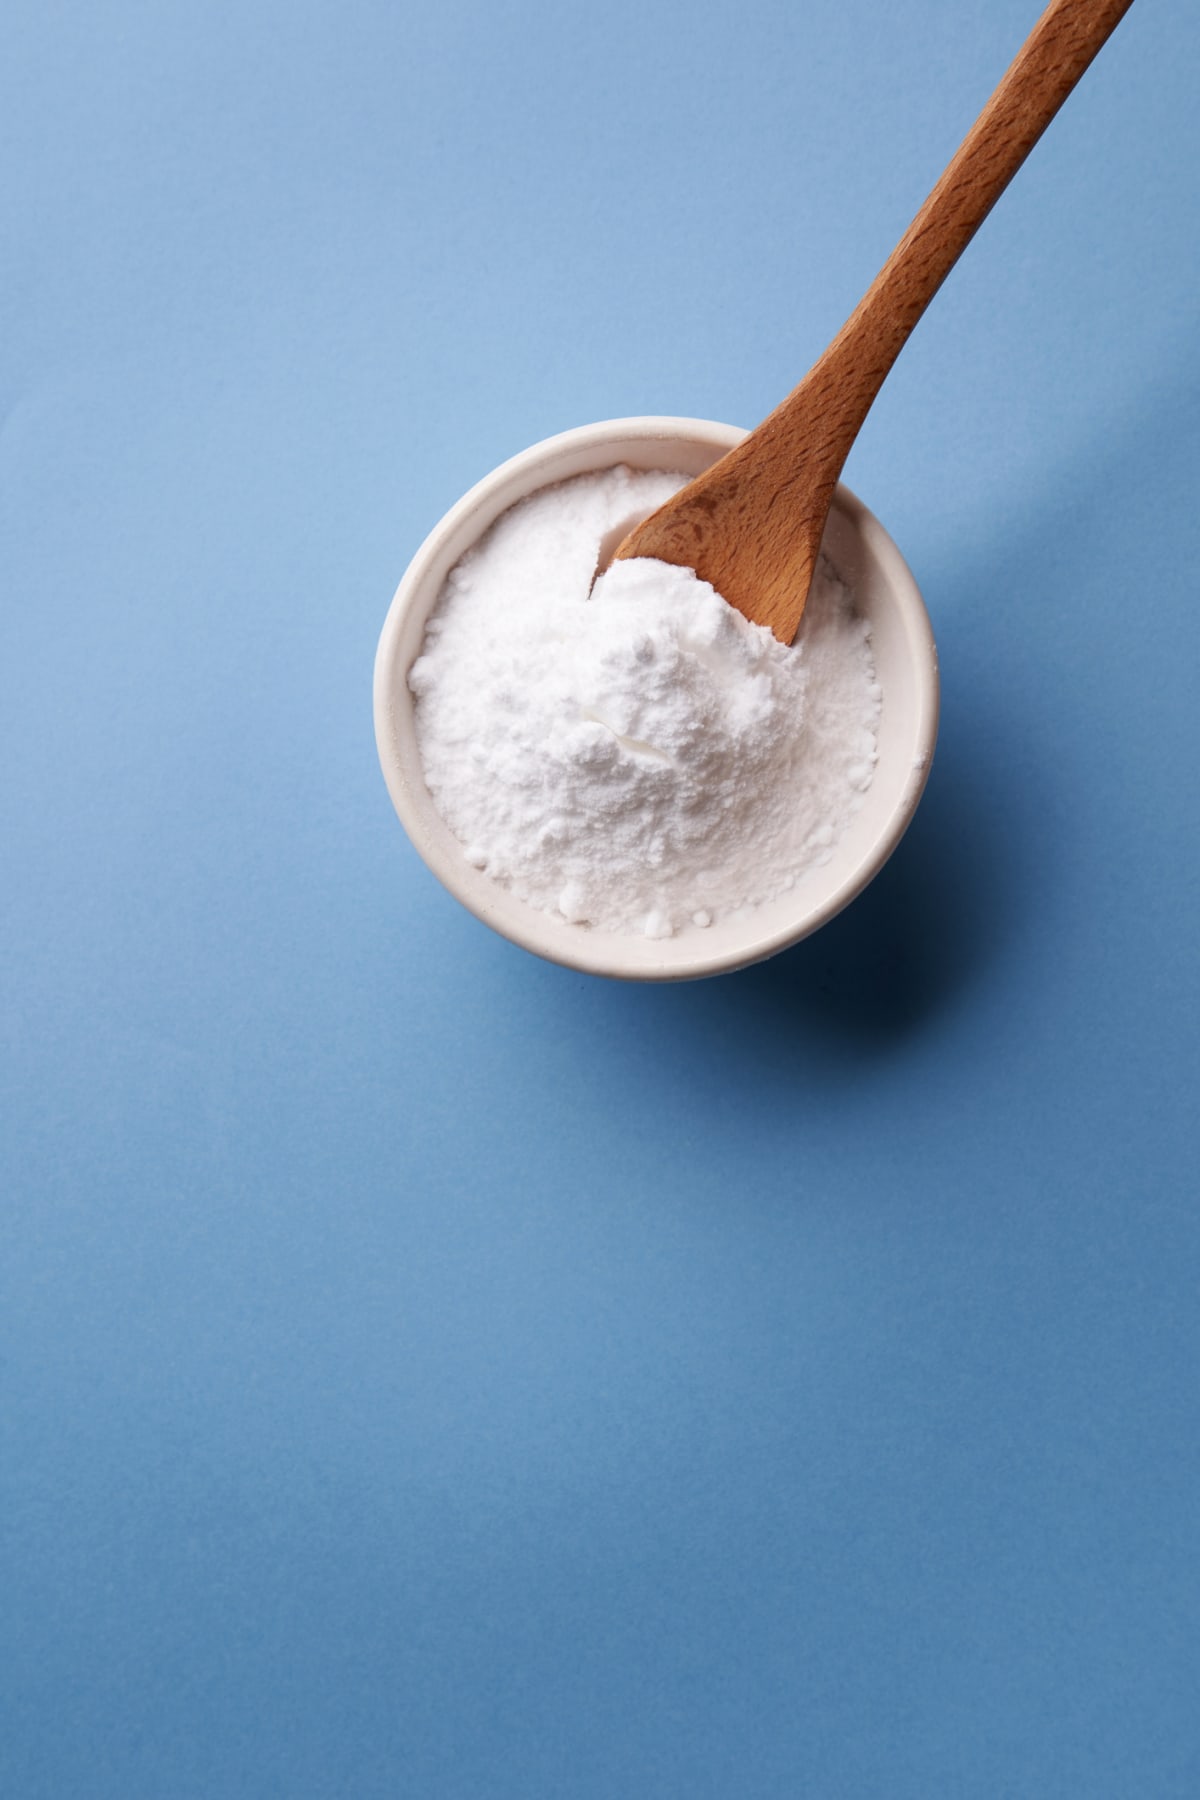 A spoon lifts baking soda from a small bowl, on a blue background